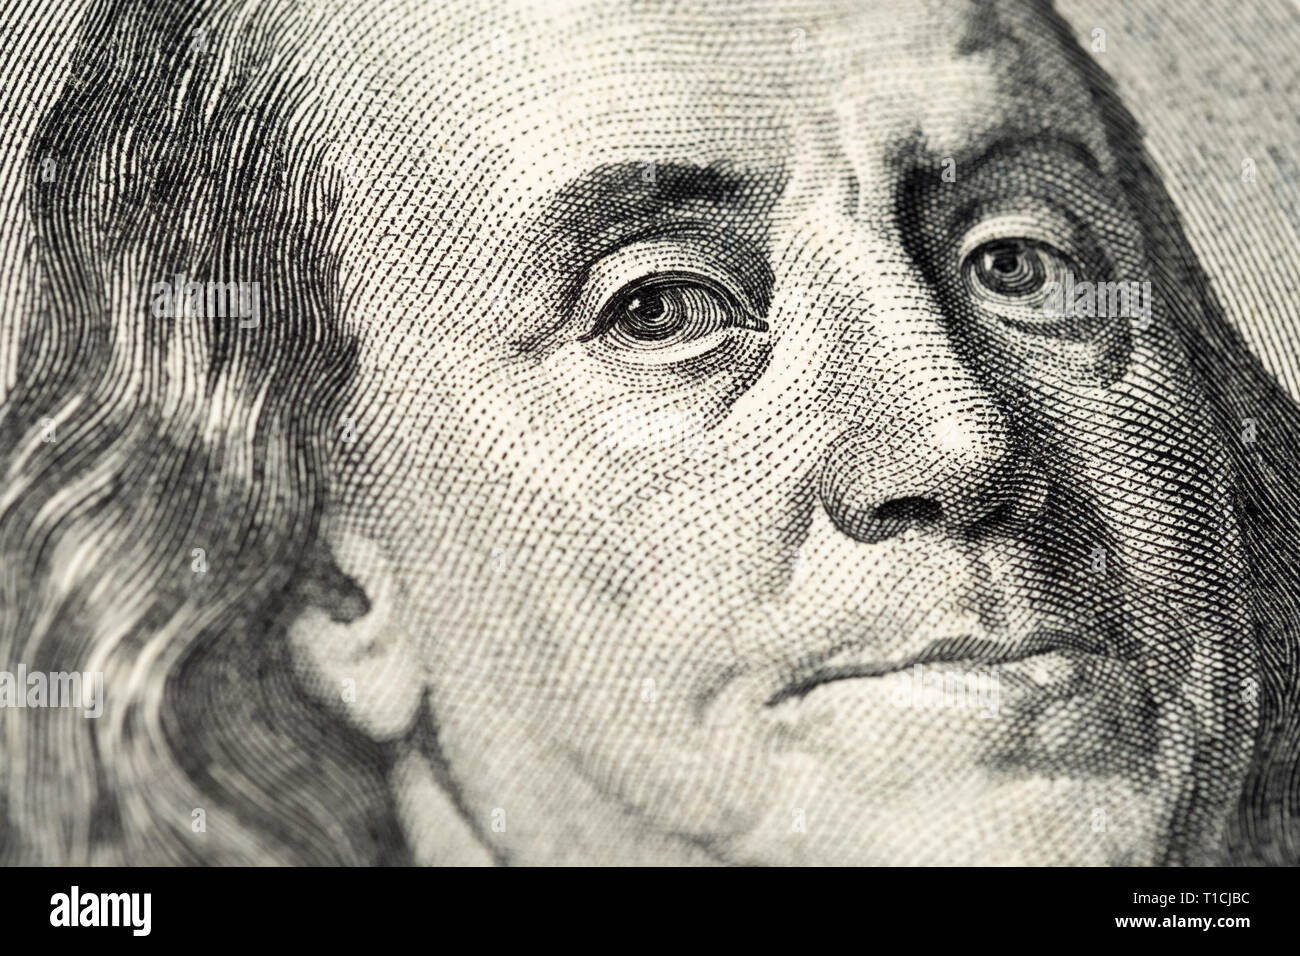 Benjamin Franklin's portrait on one hundred (100) american dollar bill. Macro close up view. Stock Photo